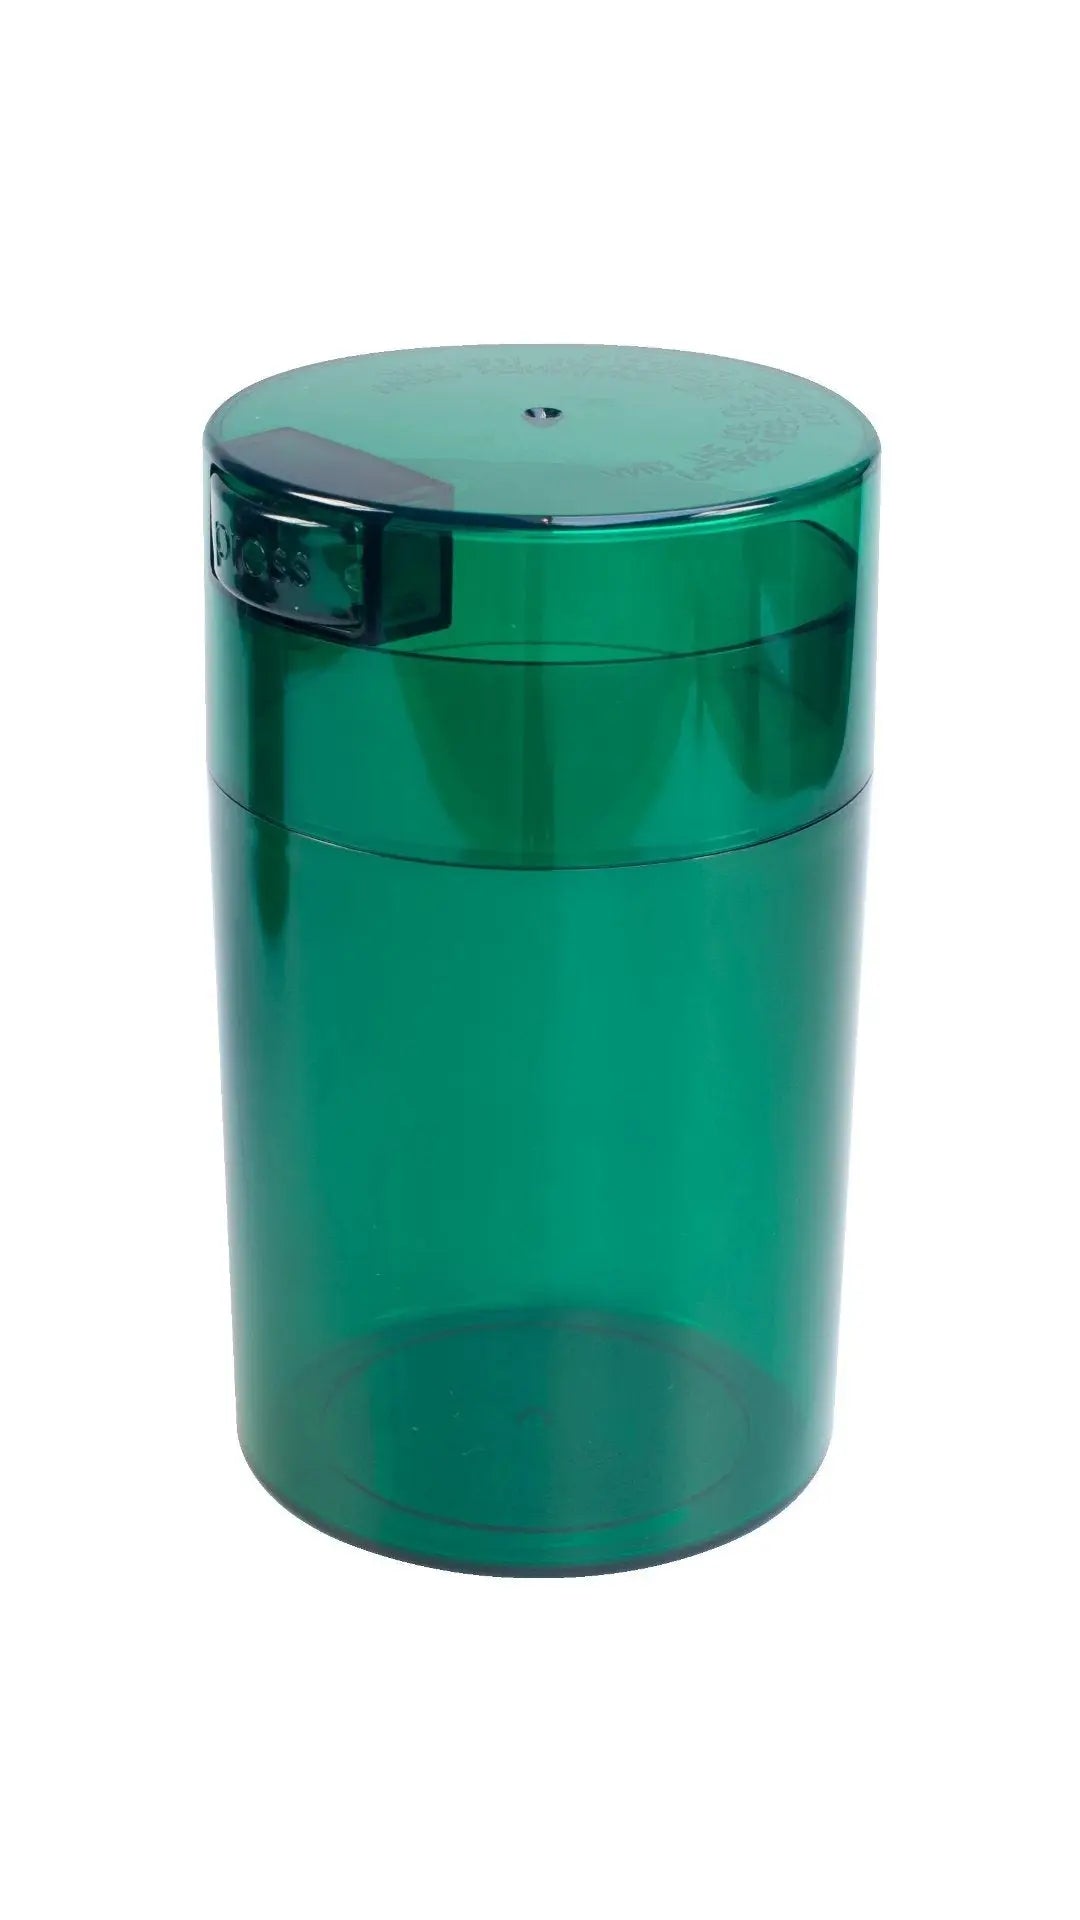 Tightvac 0,57 liter / 150g / Clear / Green Tint - TightVac Europe - The eassiest storage solutions